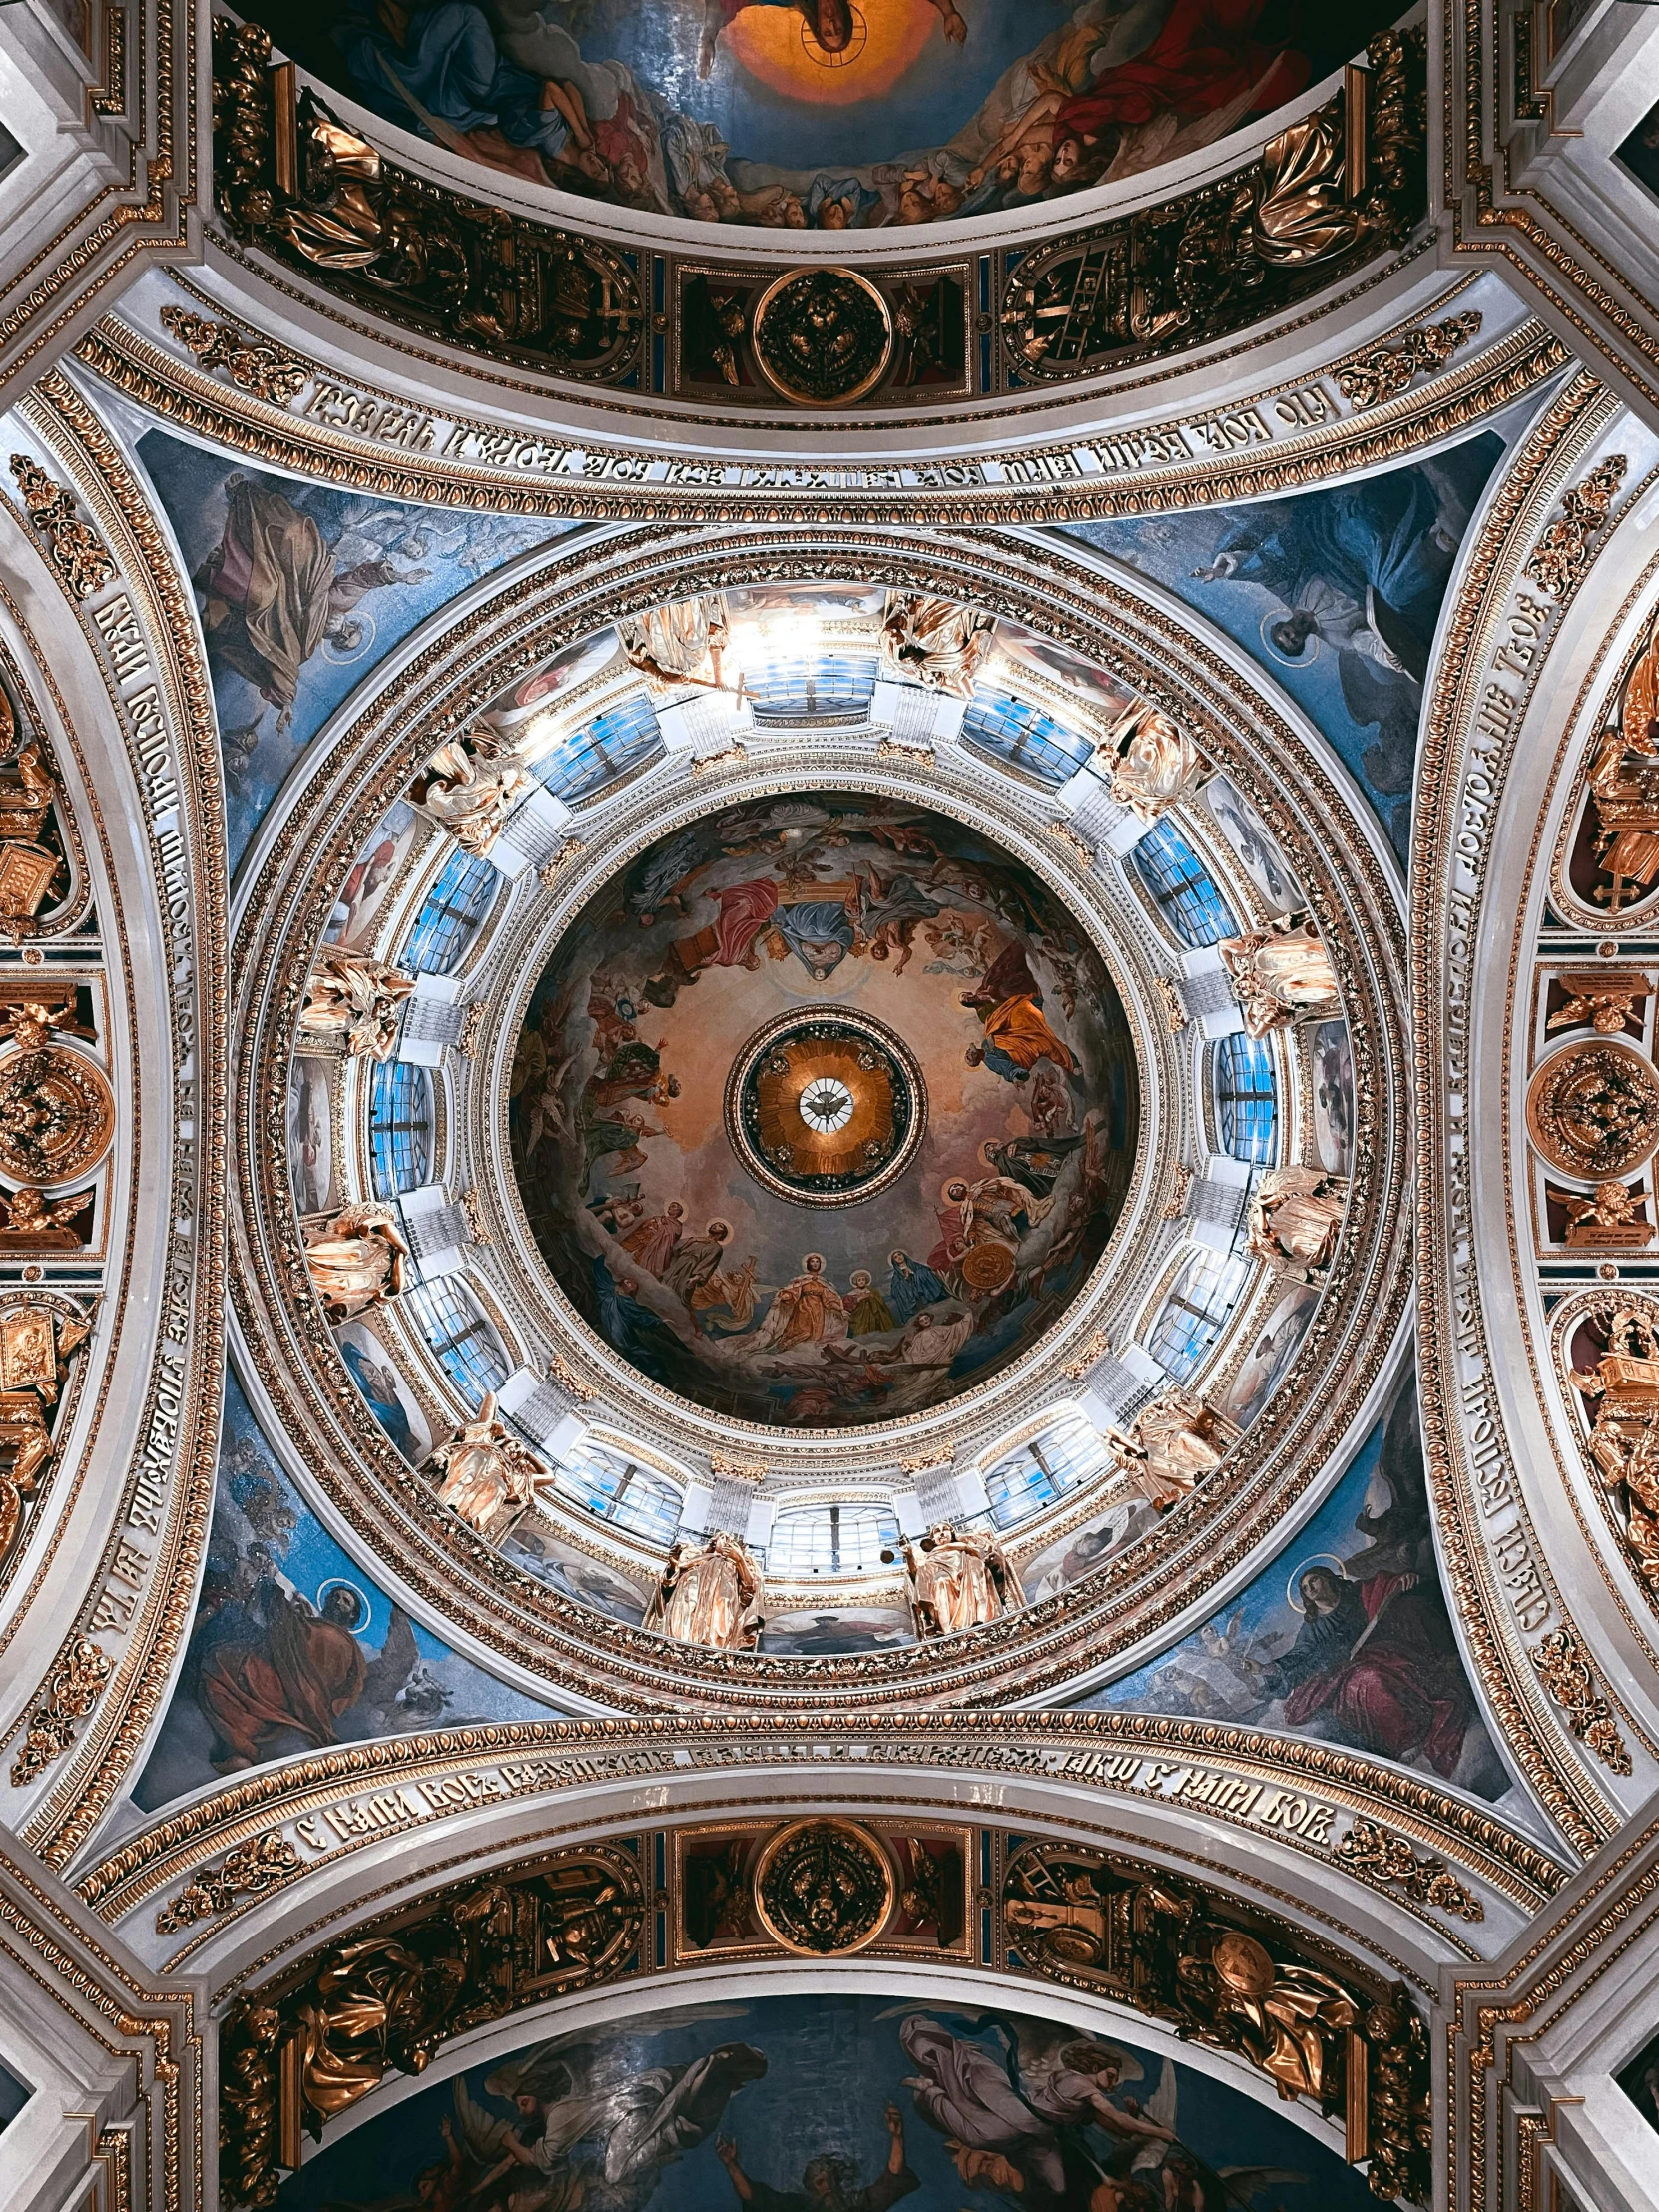 the ceiling of a building with paintings on it, an album cover, unsplash contest winner, neoclassicism, spherical, orthodox christianity, 2 5 6 x 2 5 6 pixels, chrome cathedrals